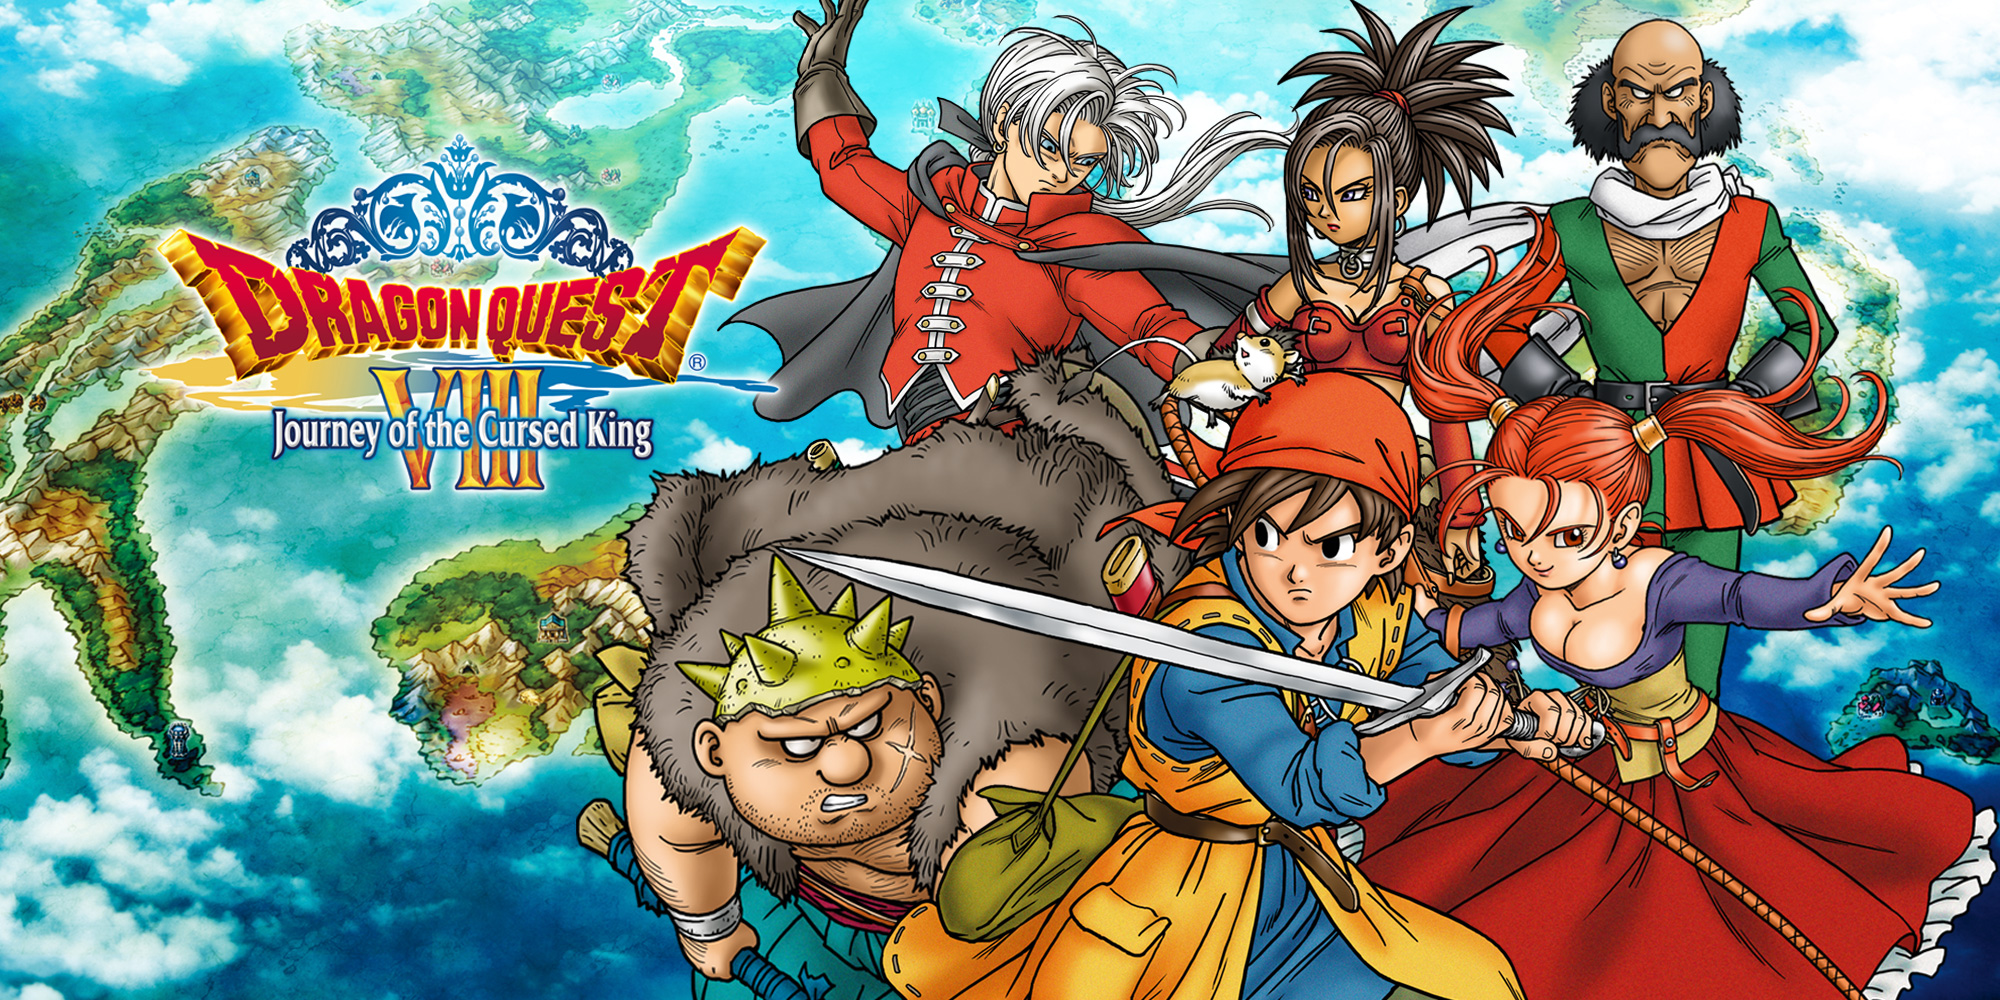 DRAGON QUEST VIII: Journey of the Cursed King | Nintendo 3DS games